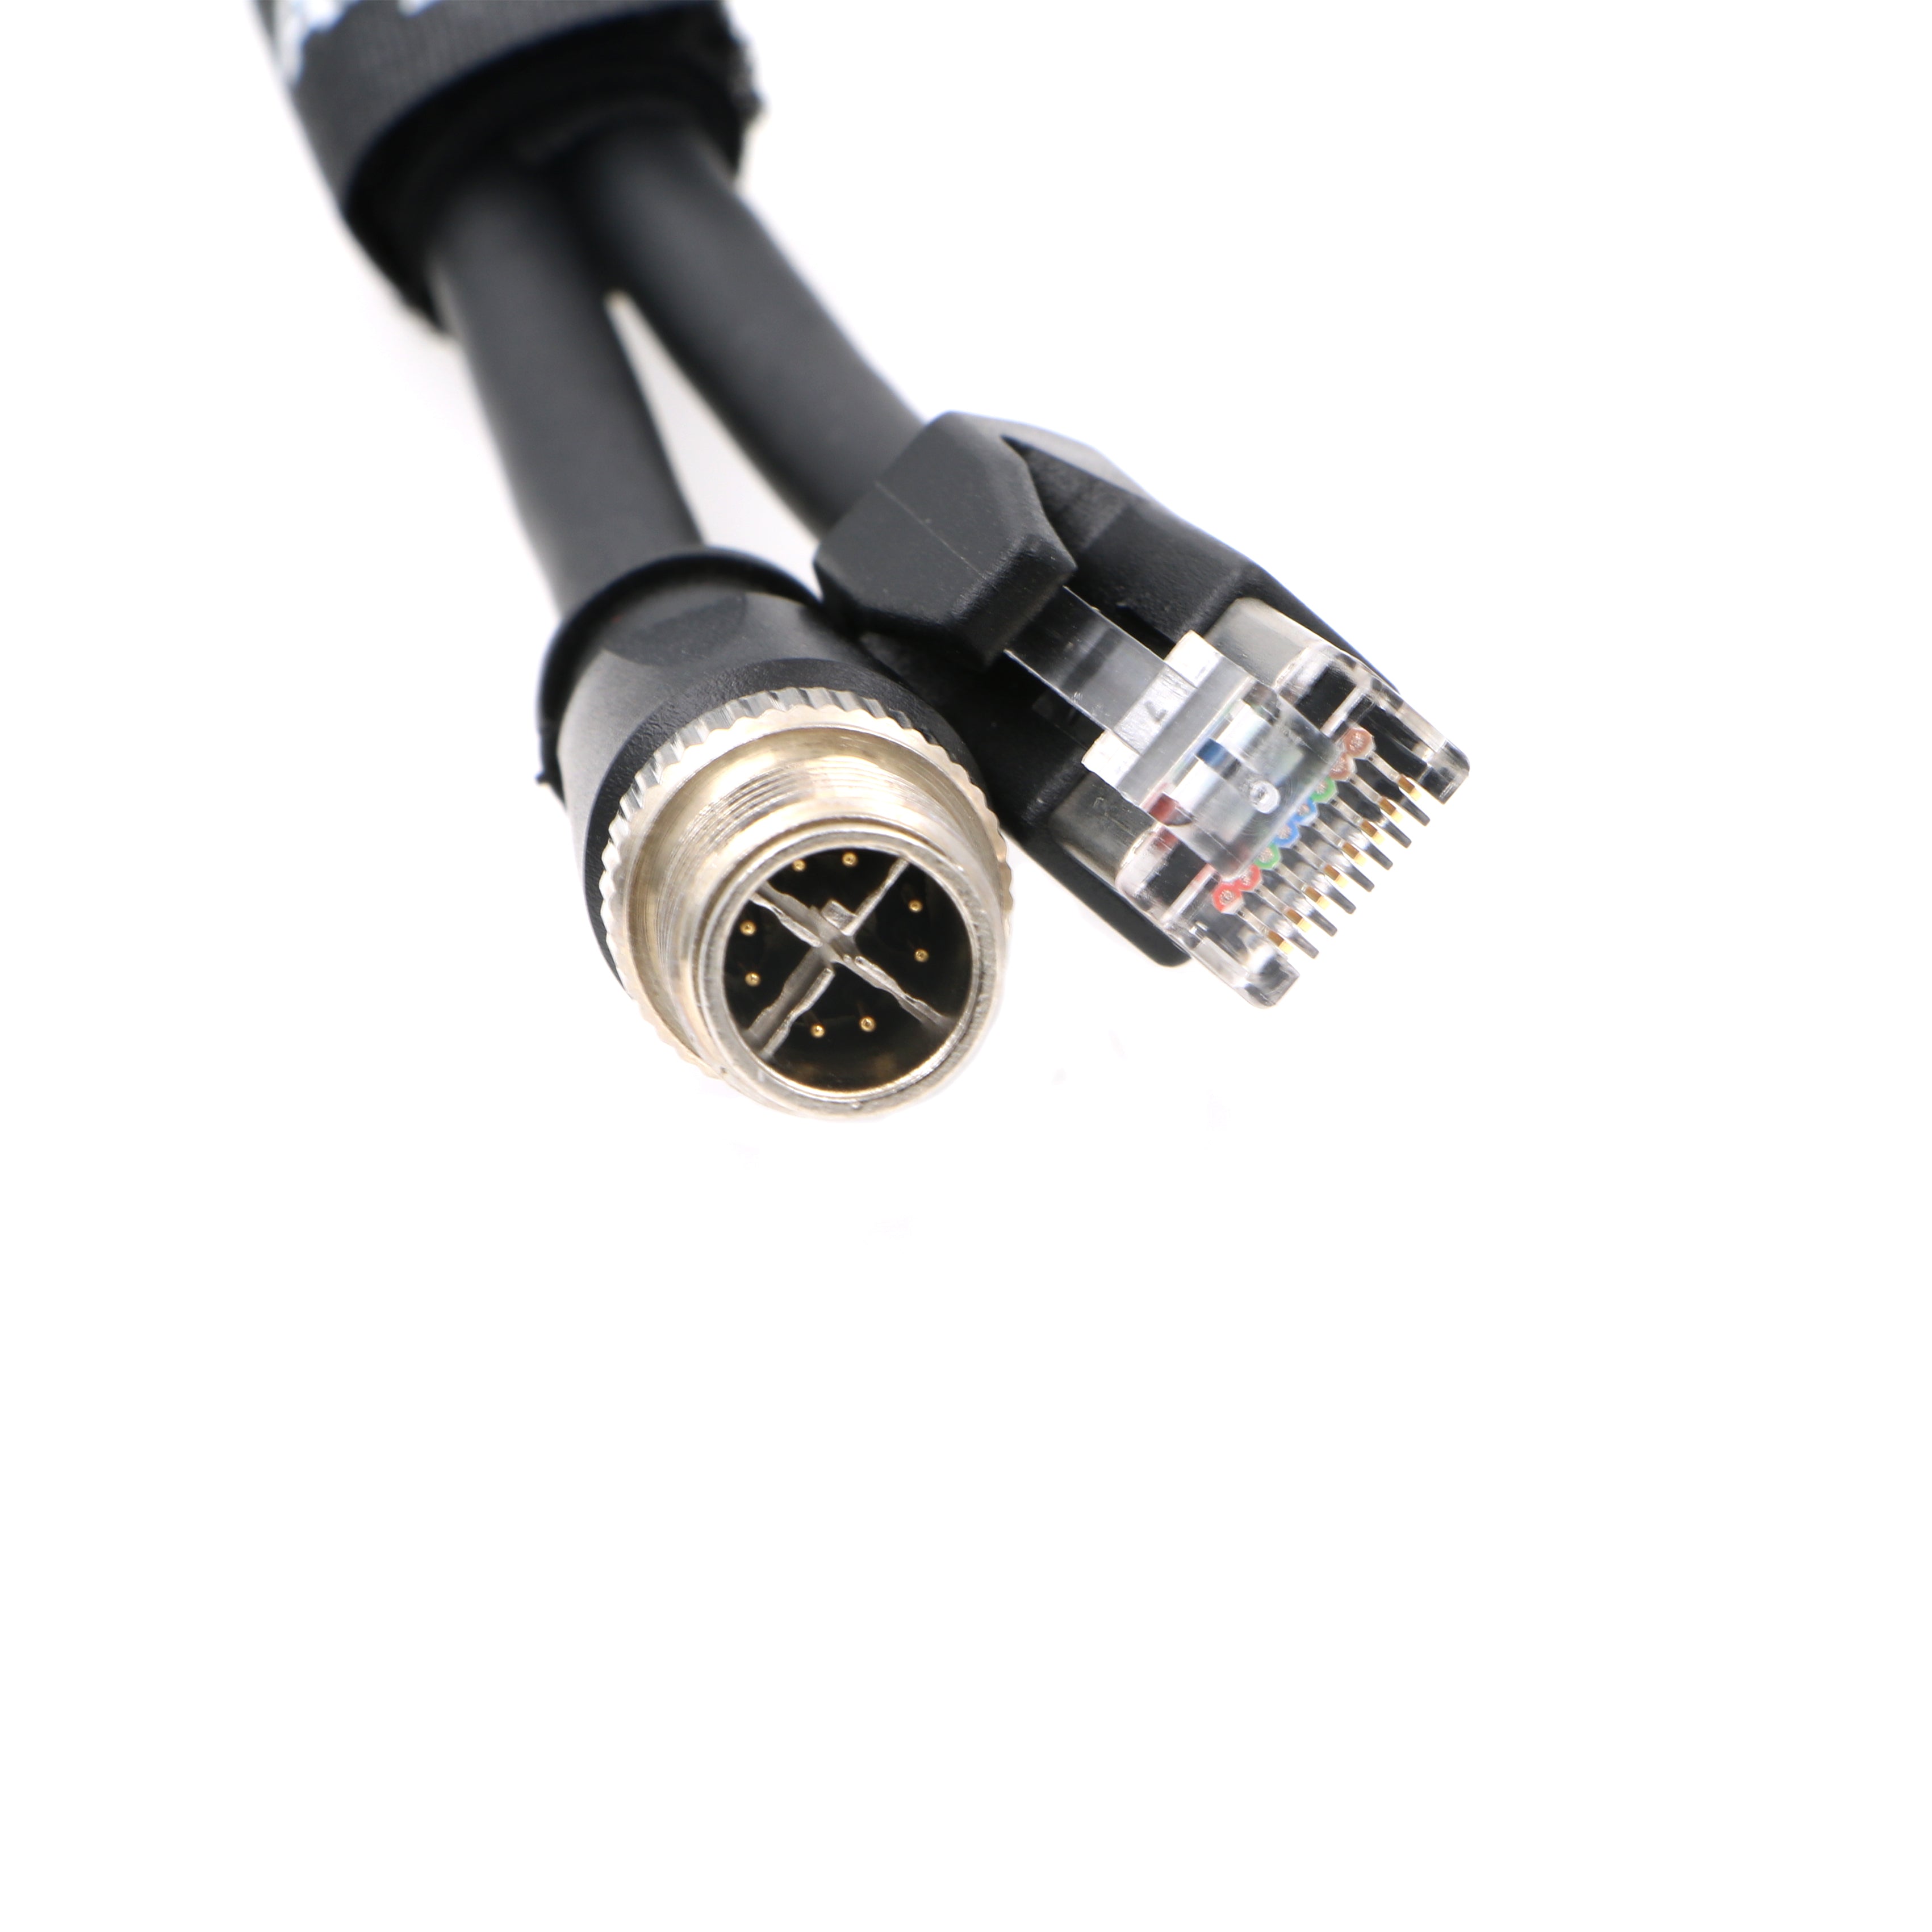 Alvin’s Cables M12 8 Position X Code to RJ45 CCB-84901-2001-03 Ethernet Cable for Cognex in Sight 8200 8400 Series P67 Waterproof  Black